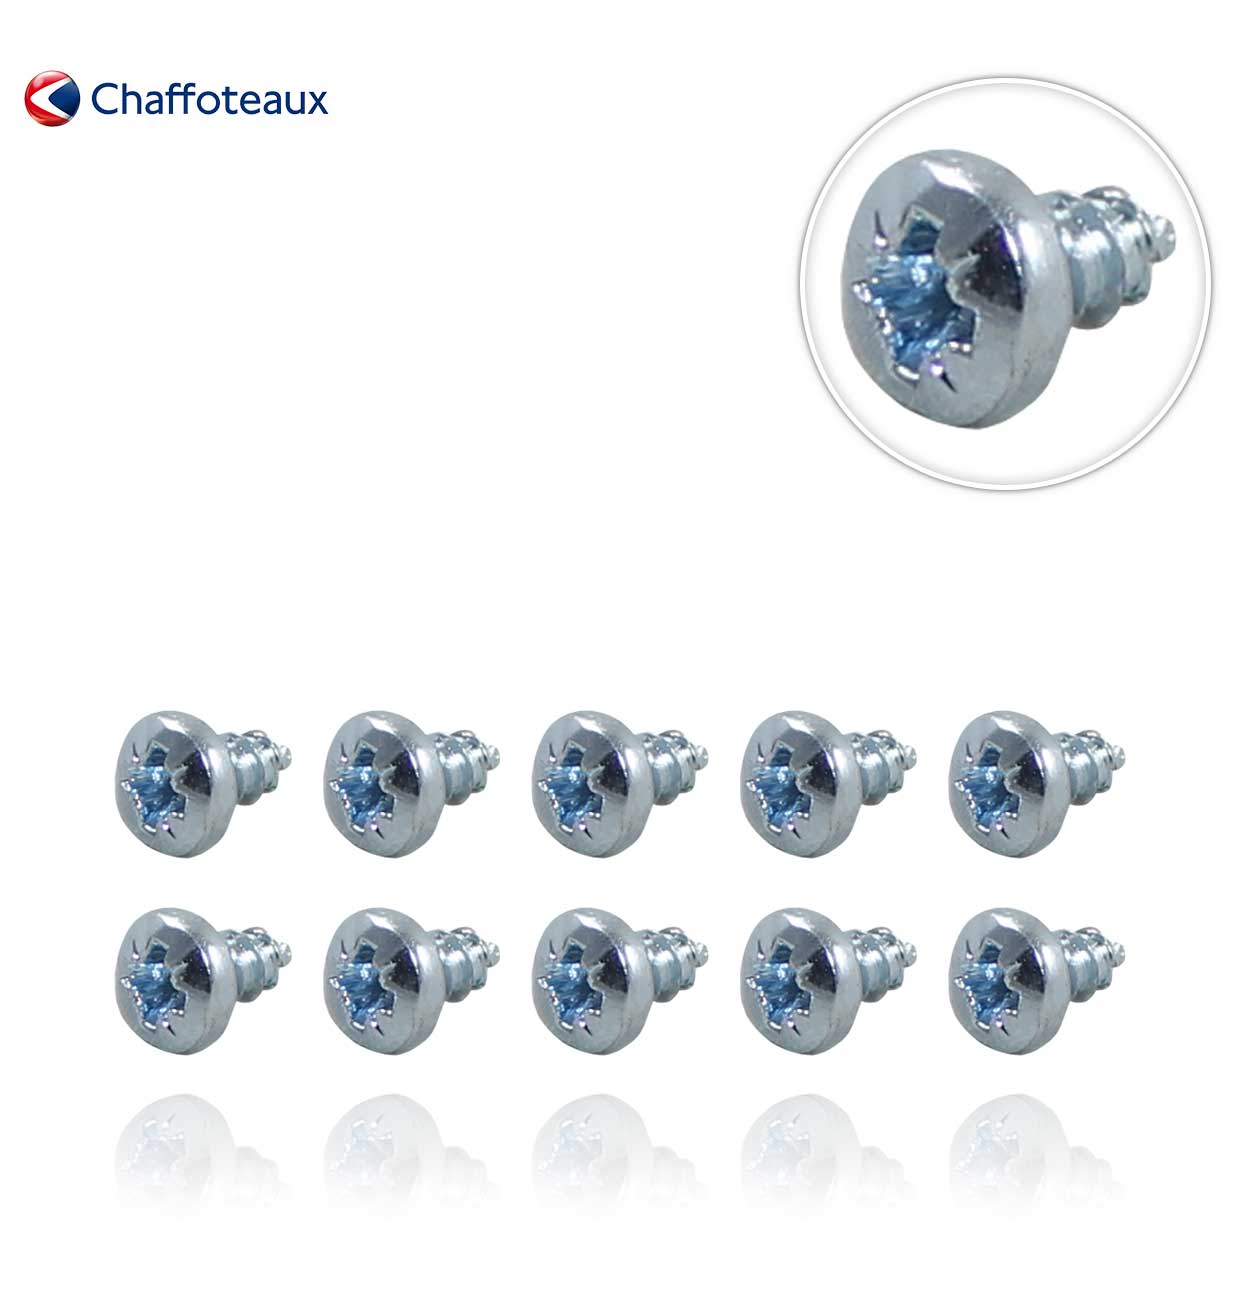 TORNILLOS CHAPA D: 3.5-6.5  (10uds.) CHAFFOTEAUX  60031521-03